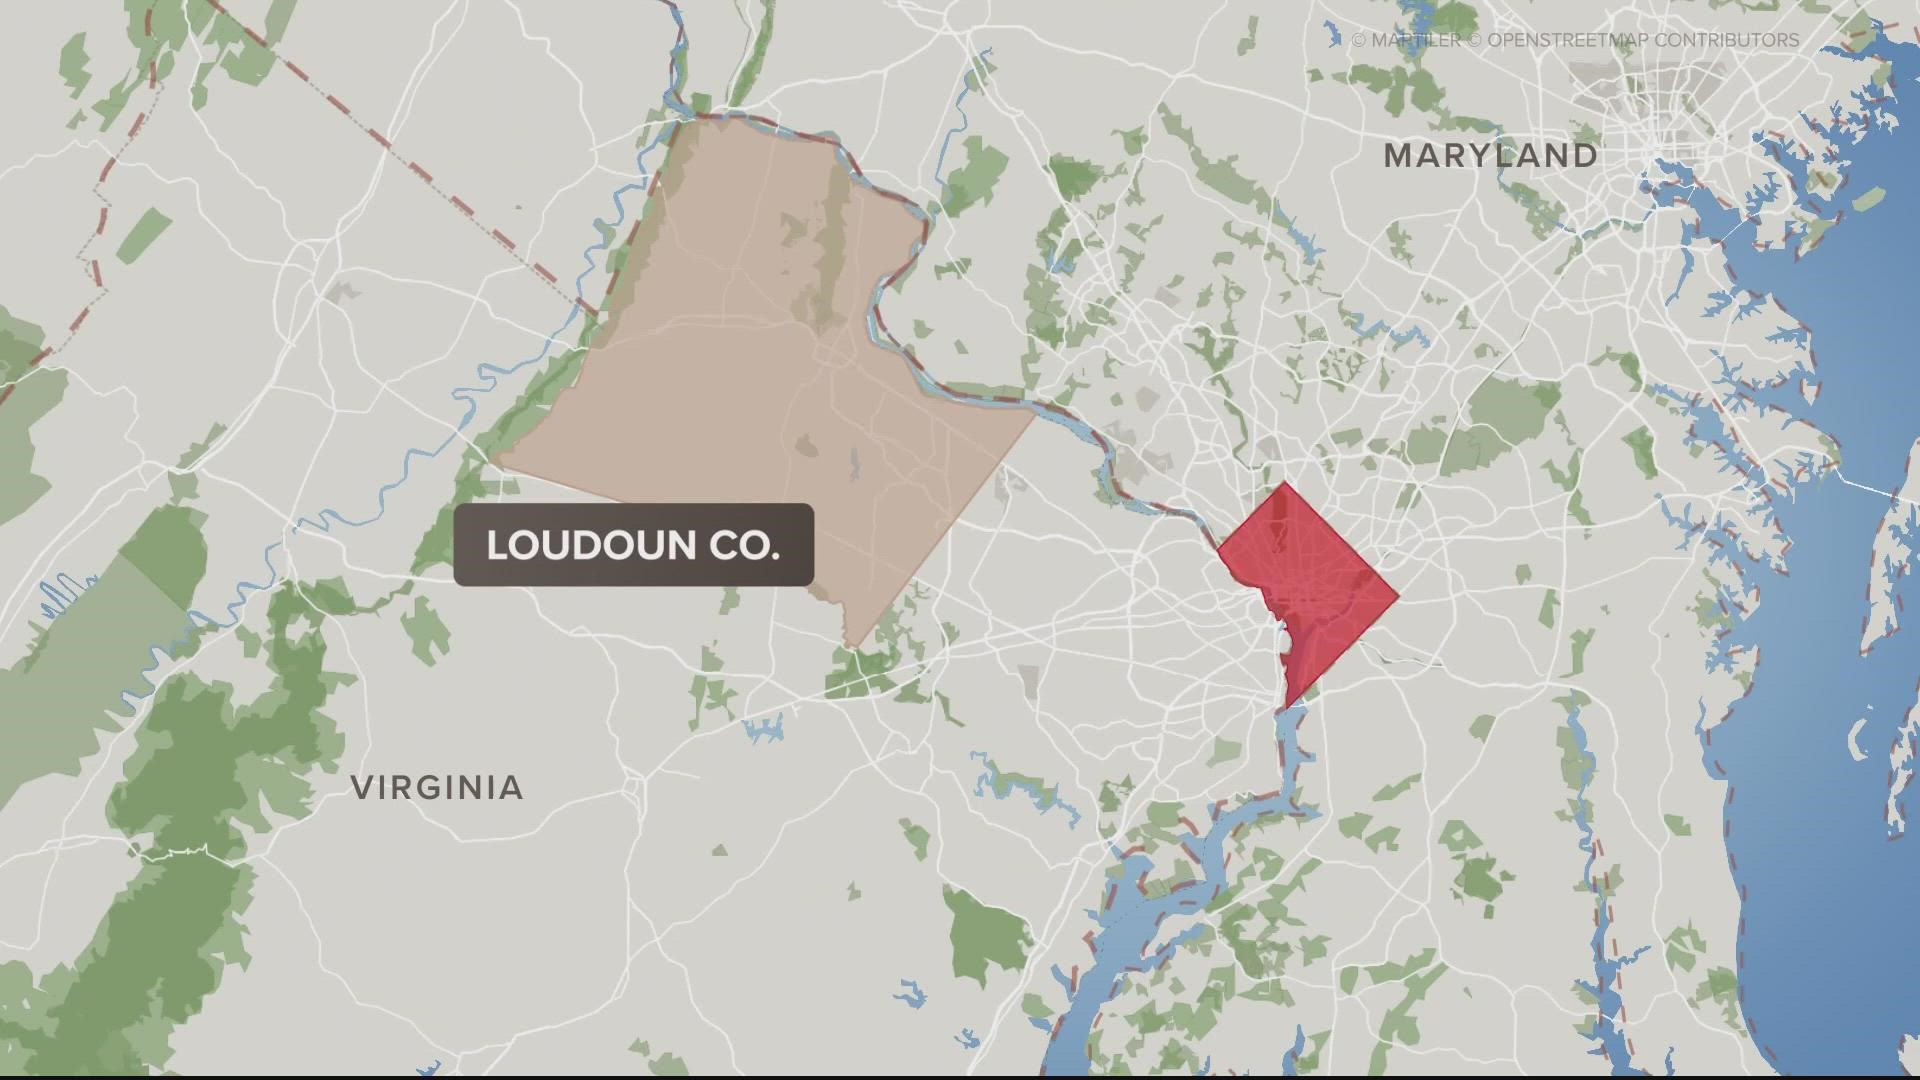 The Loudoun County School Board voted Tuesday not to publicly release its report on its handling of sexual assaults that led to the firing of its superintendent.